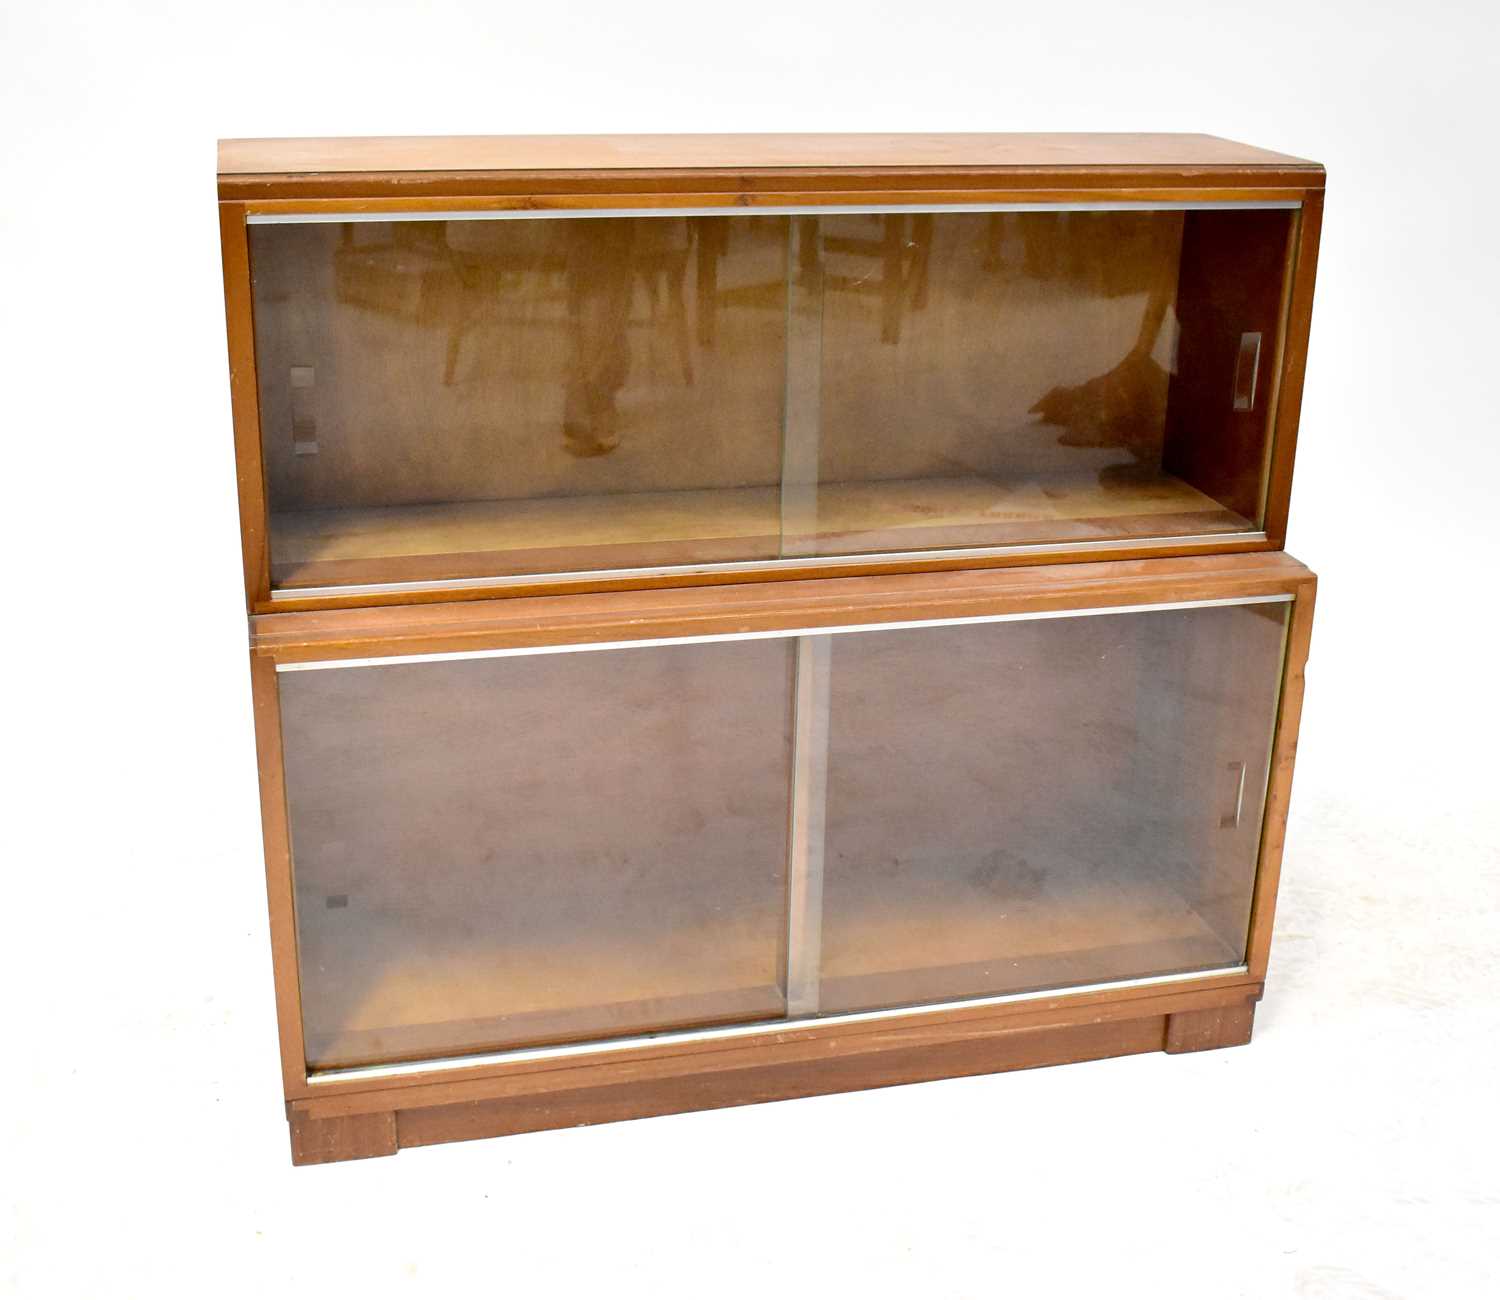 A two-section stacking bookcase with sliding glass doors, height 80cm, length 89cm, width of top